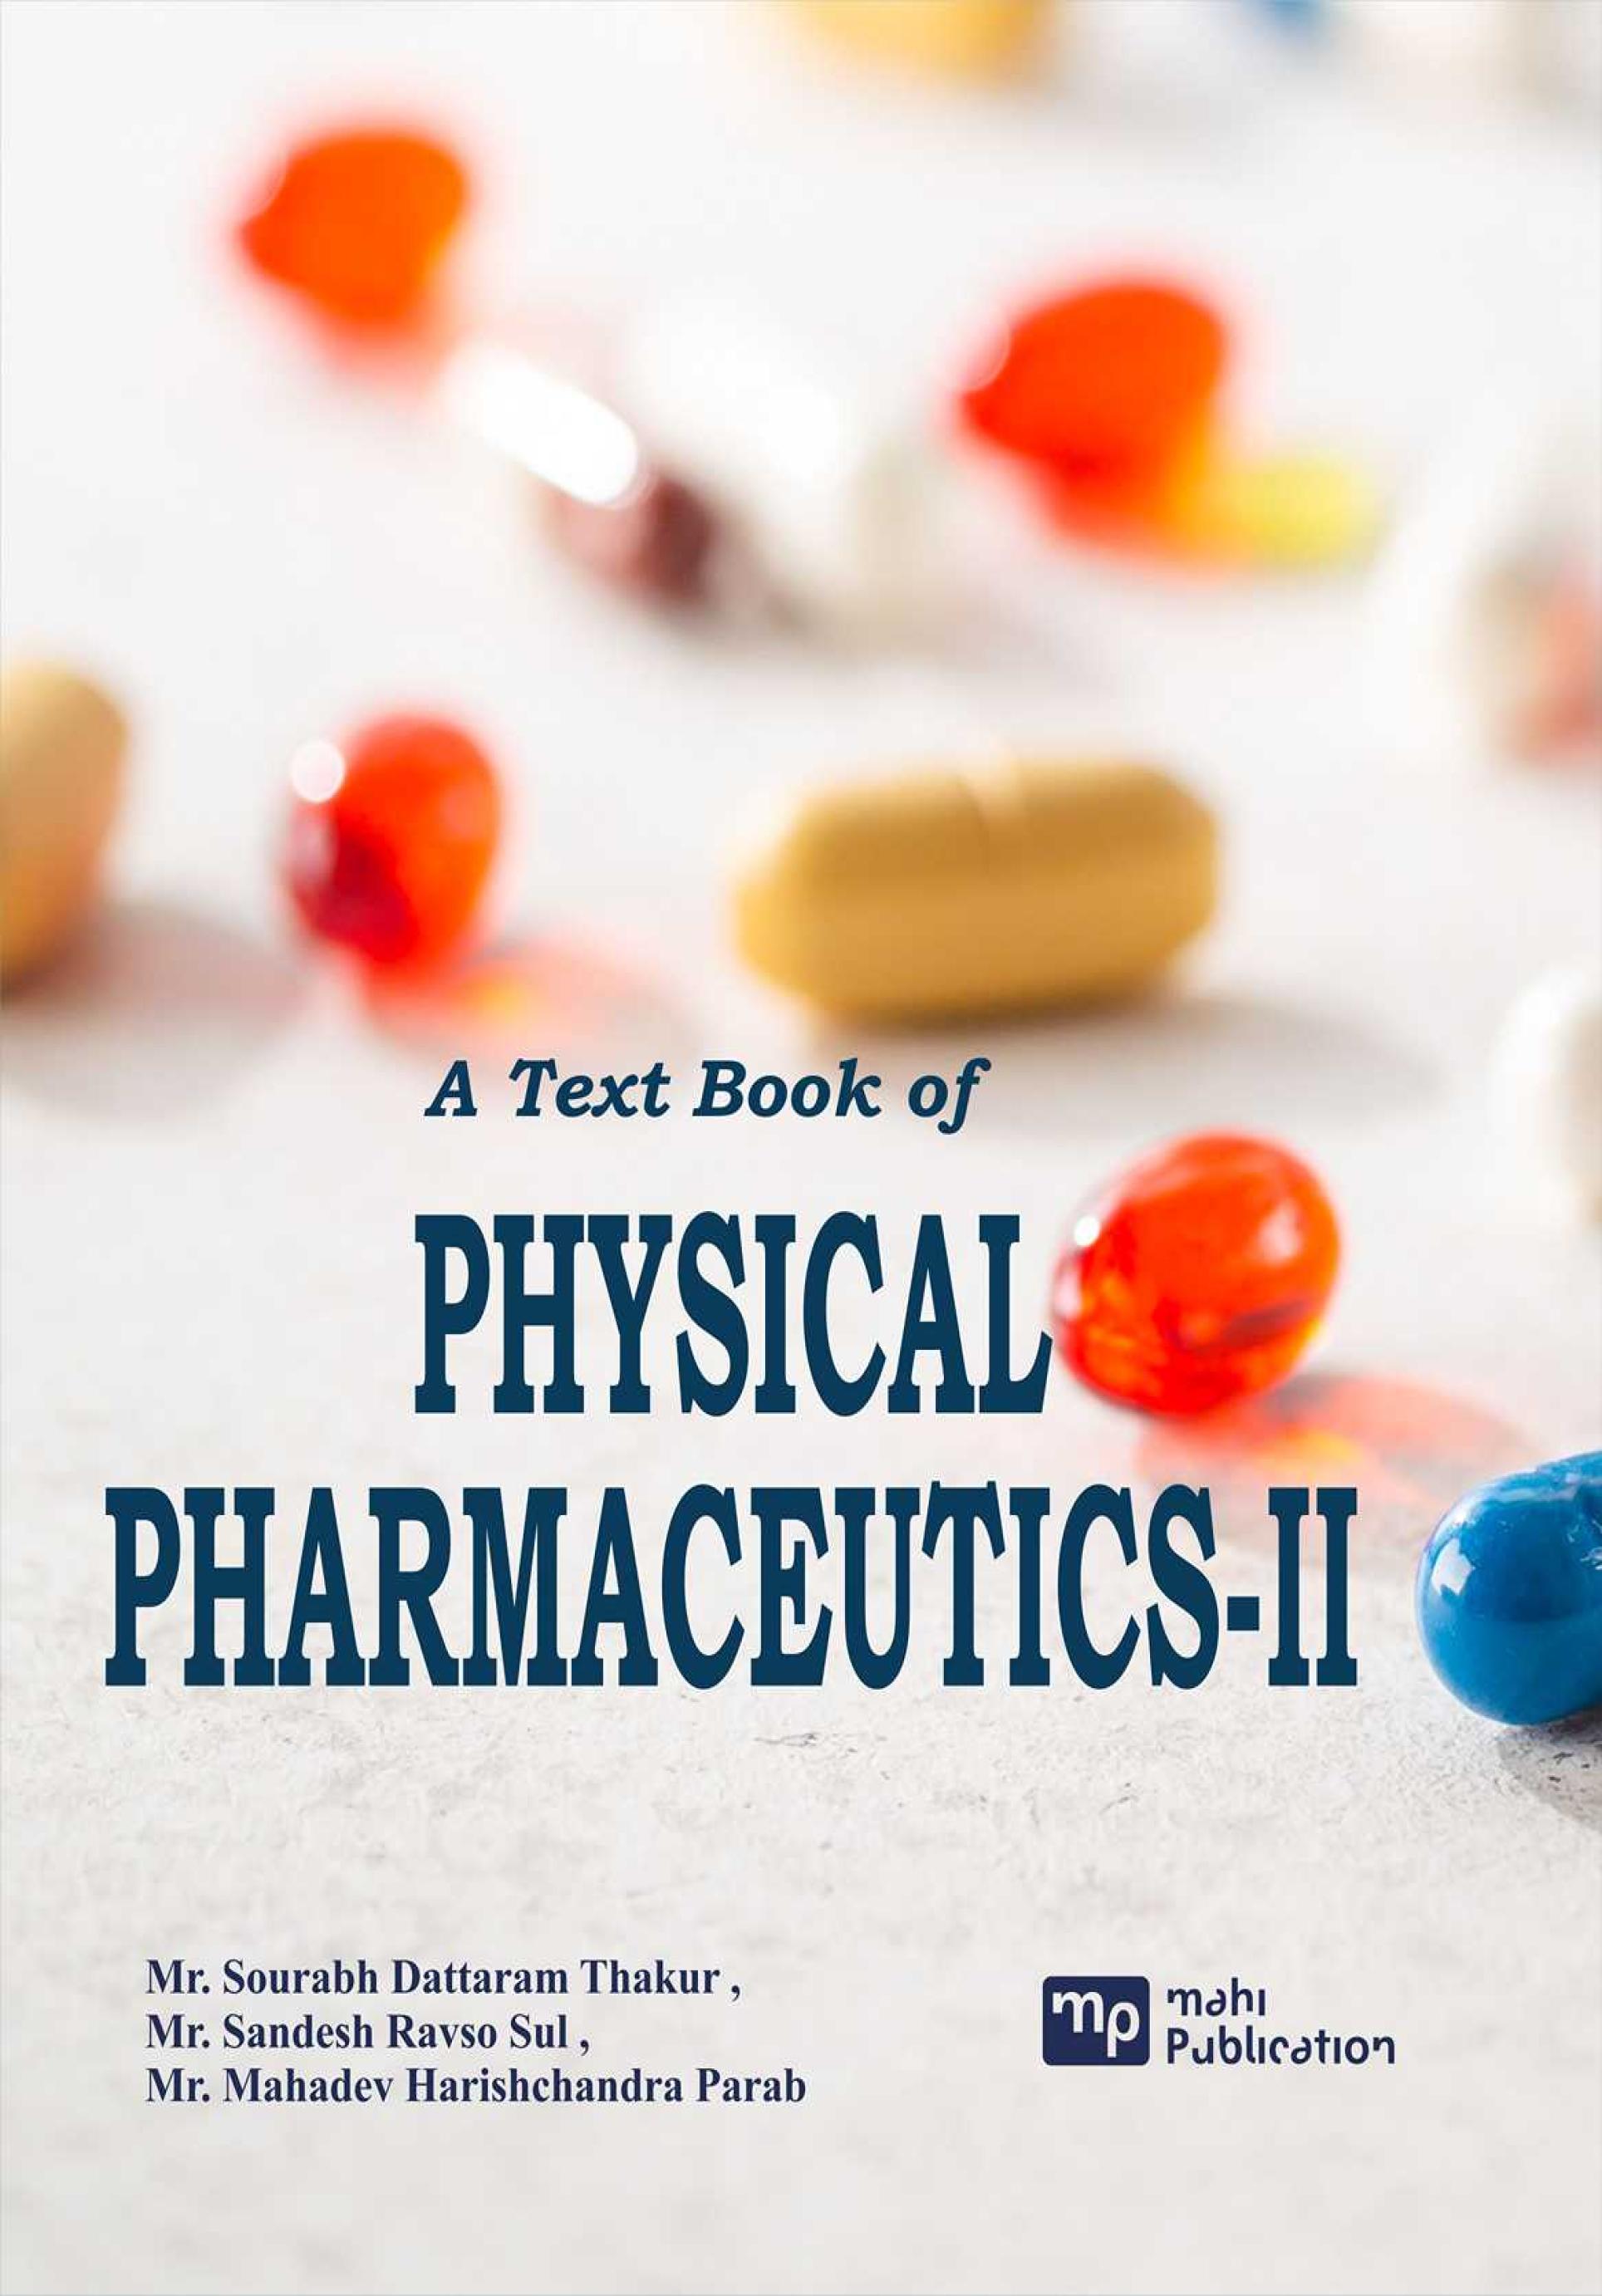 A Text Book of PHYSICAL PHARMACEUTICS-II